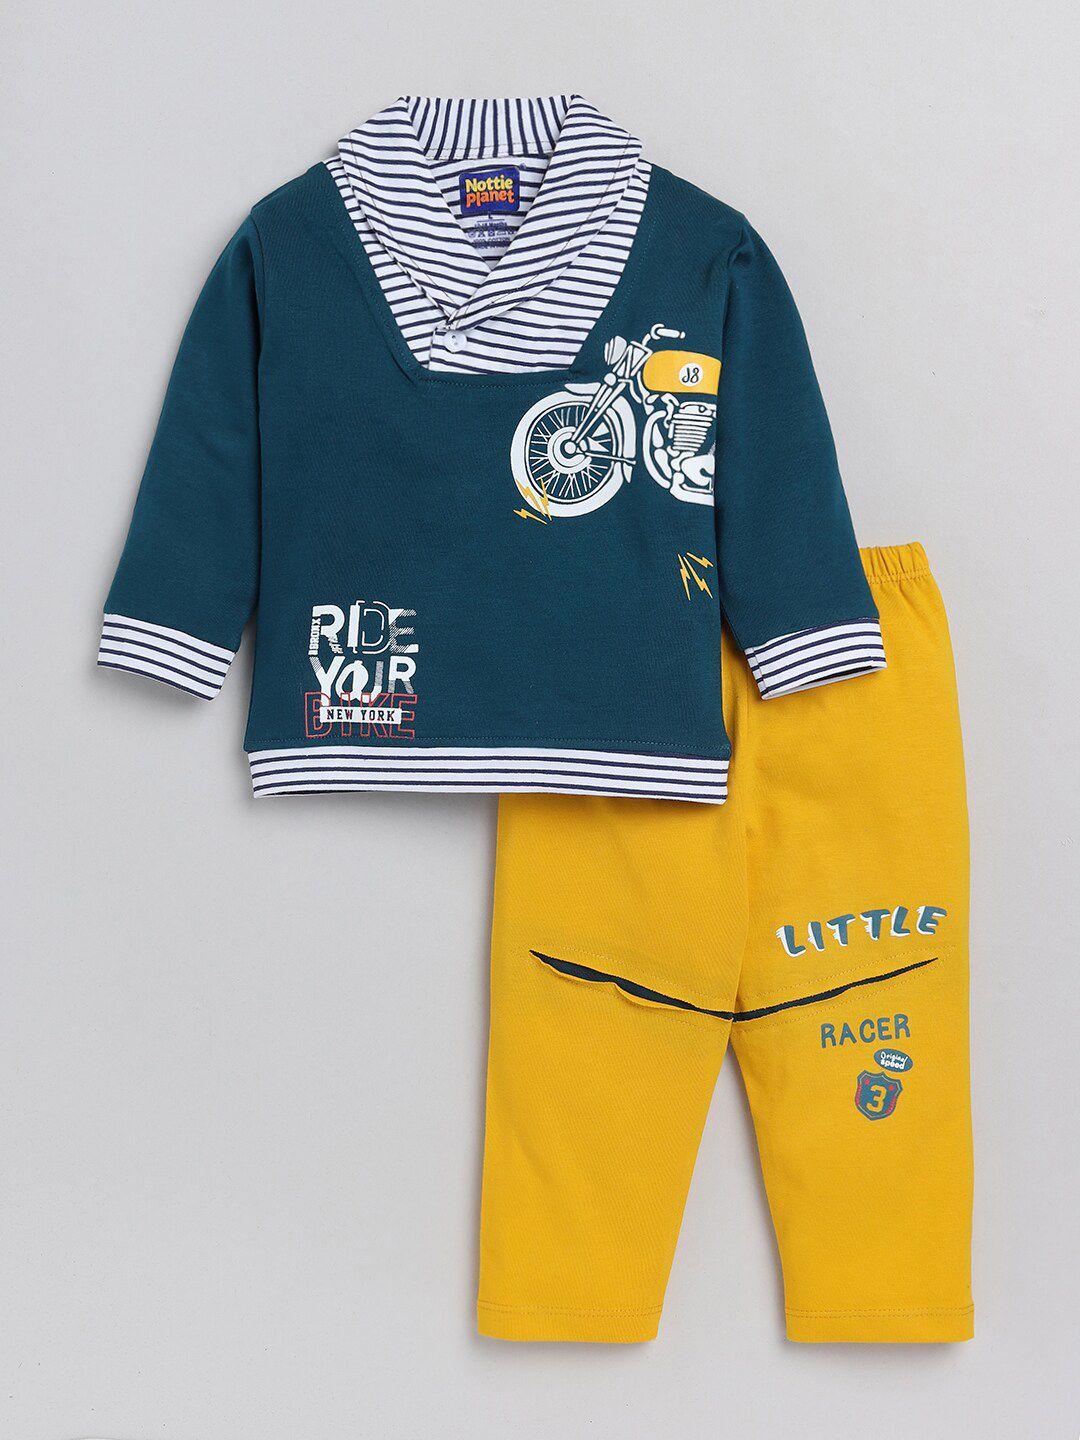 nottie planet boys printed pure cotton top with trousers